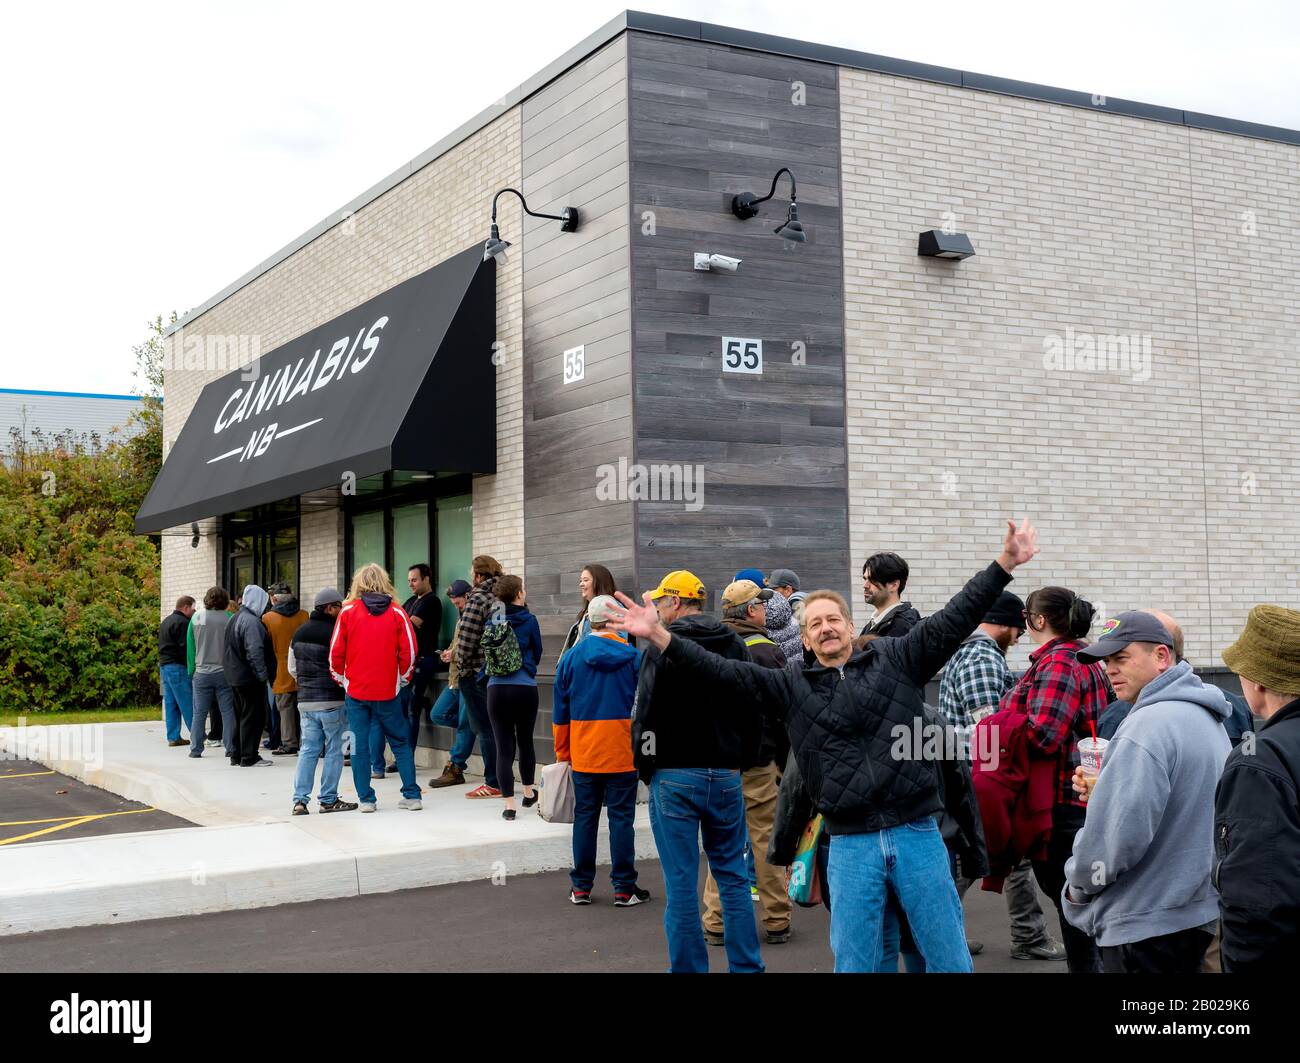 Saint John, New Brunswick, Canada - October 17, 2018: People line up to purchase cannabis legally from a Cannabis NB store. Stock Photo